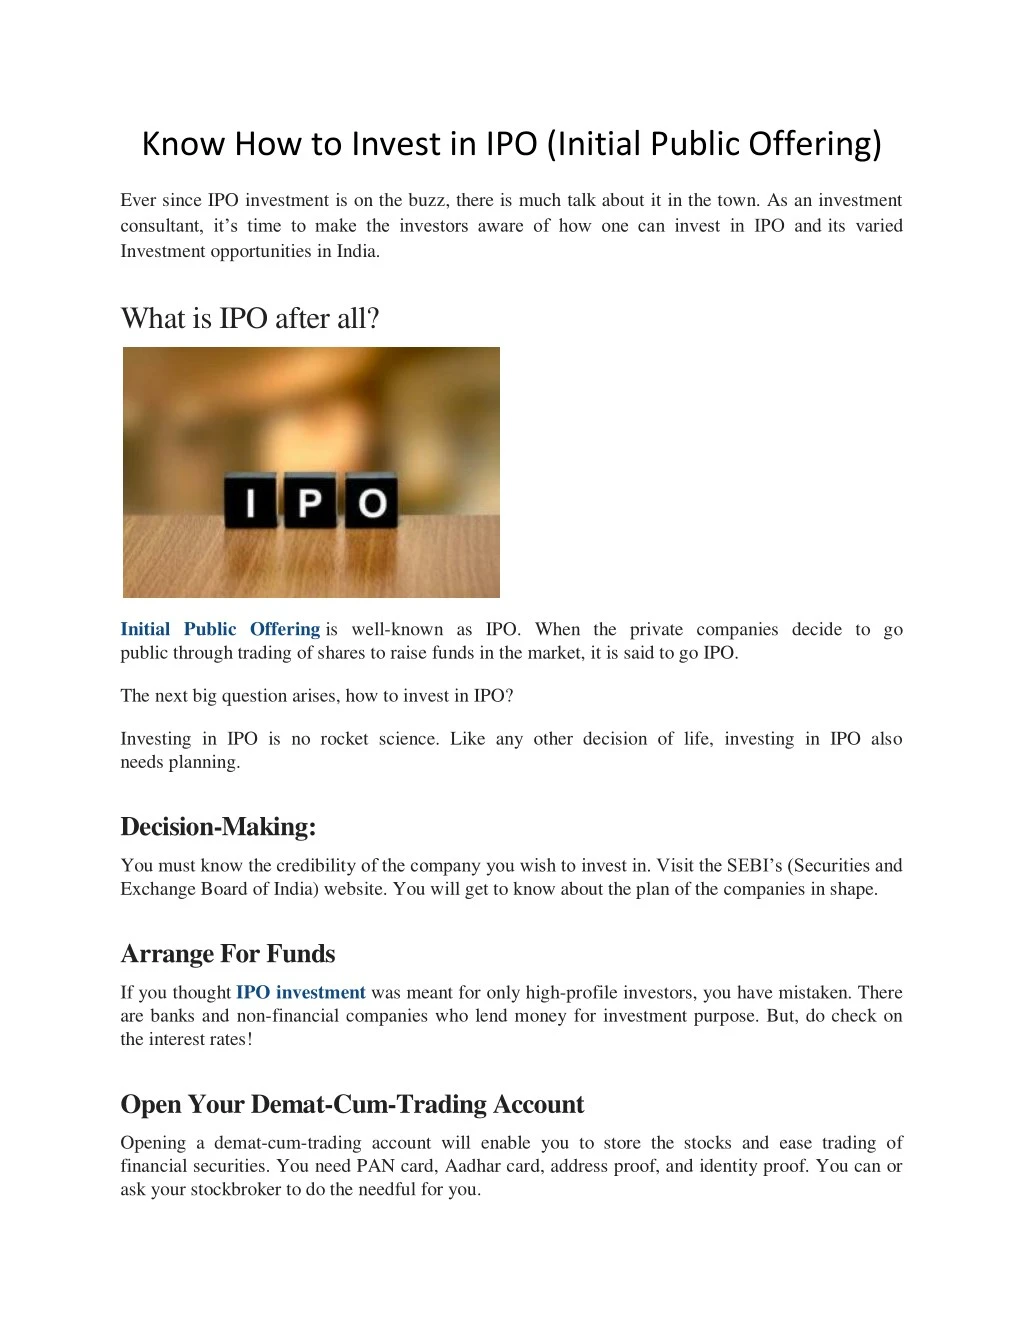 know how to invest in ipo initial public offering